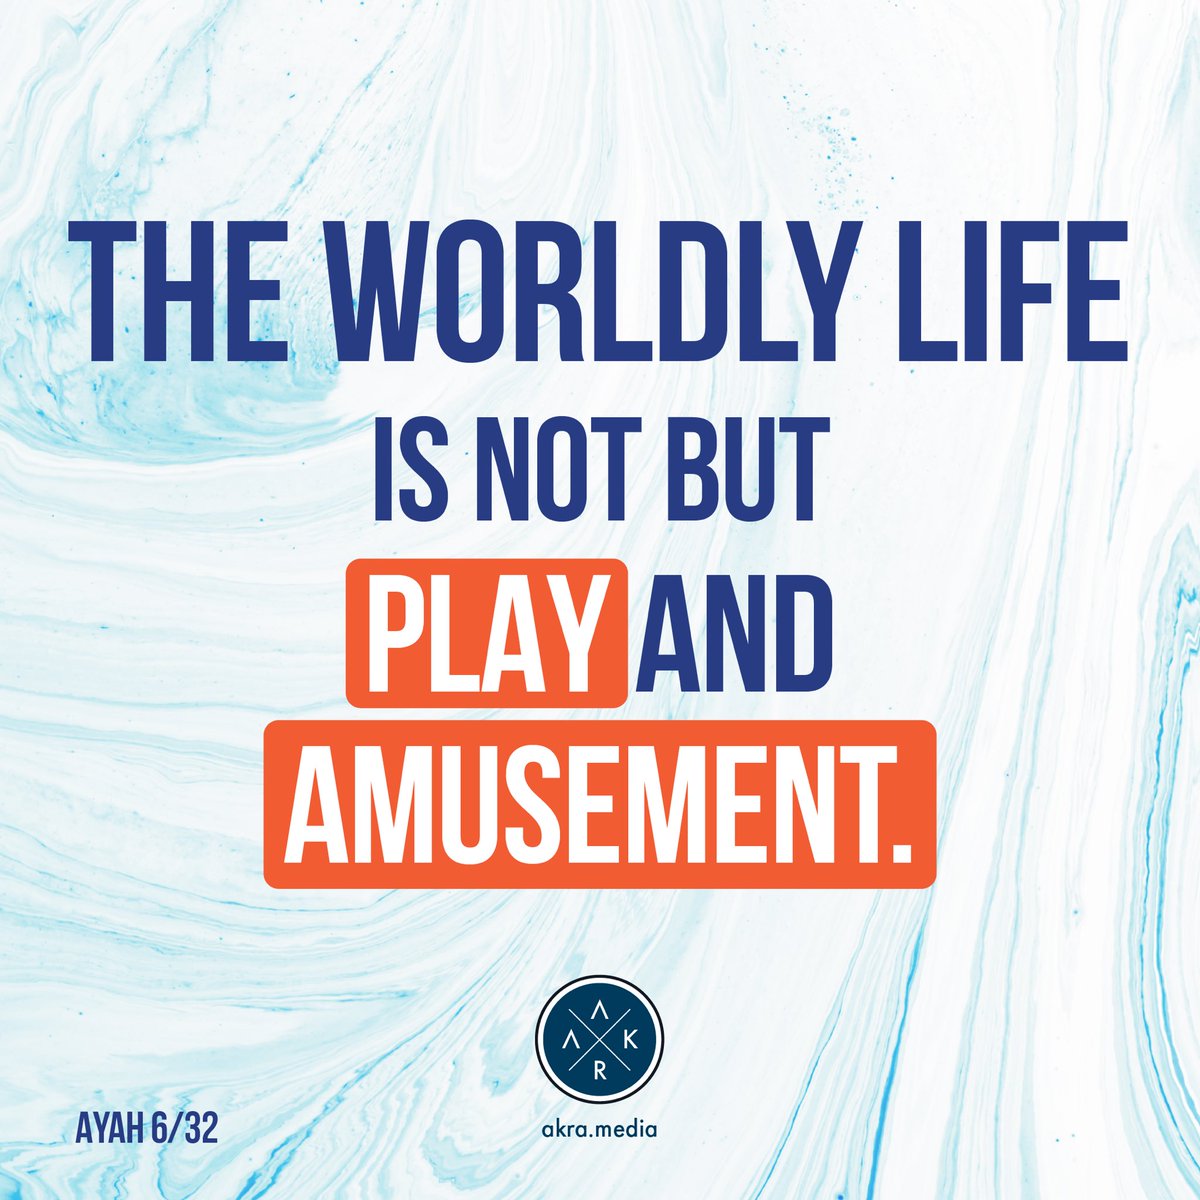 “The worldly life is not but play and amusement…”
6/32

#thequran #ayah #islam #religionislam #worldlylife #amusement #world #life #hereafter #faith #dayofjudgement